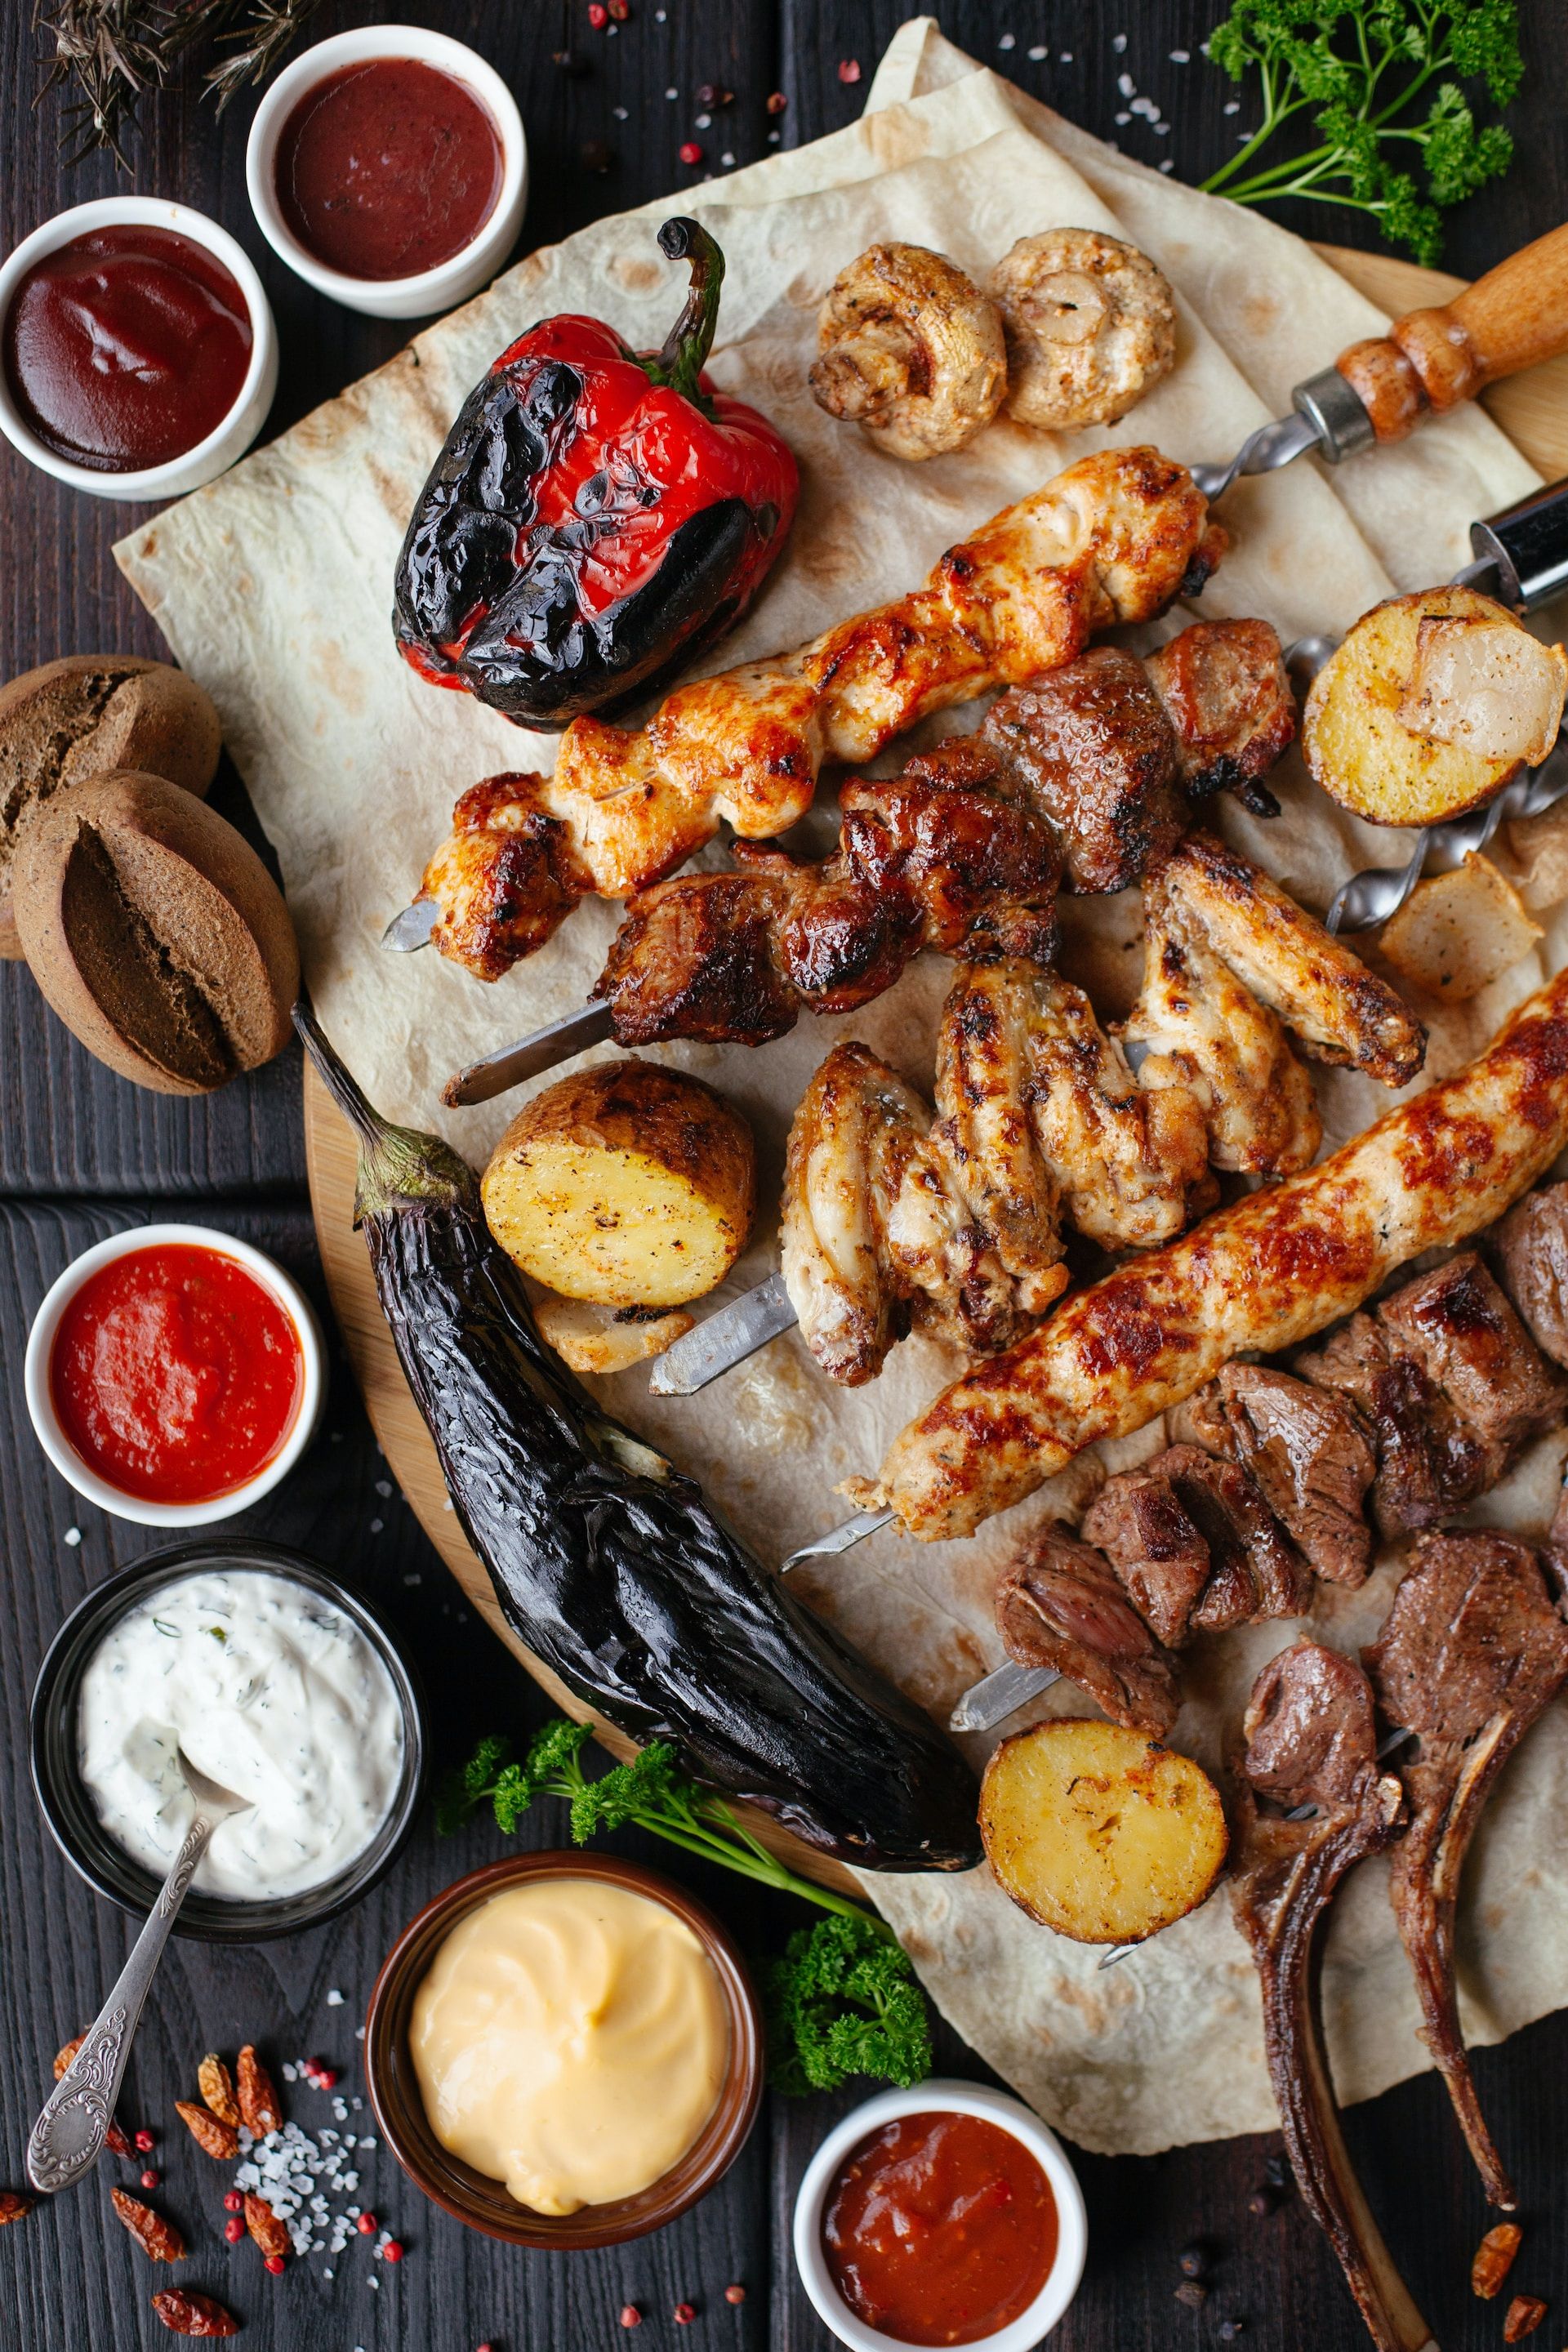 Platter of savory Greek food, featuring grilled meat and vegetables.